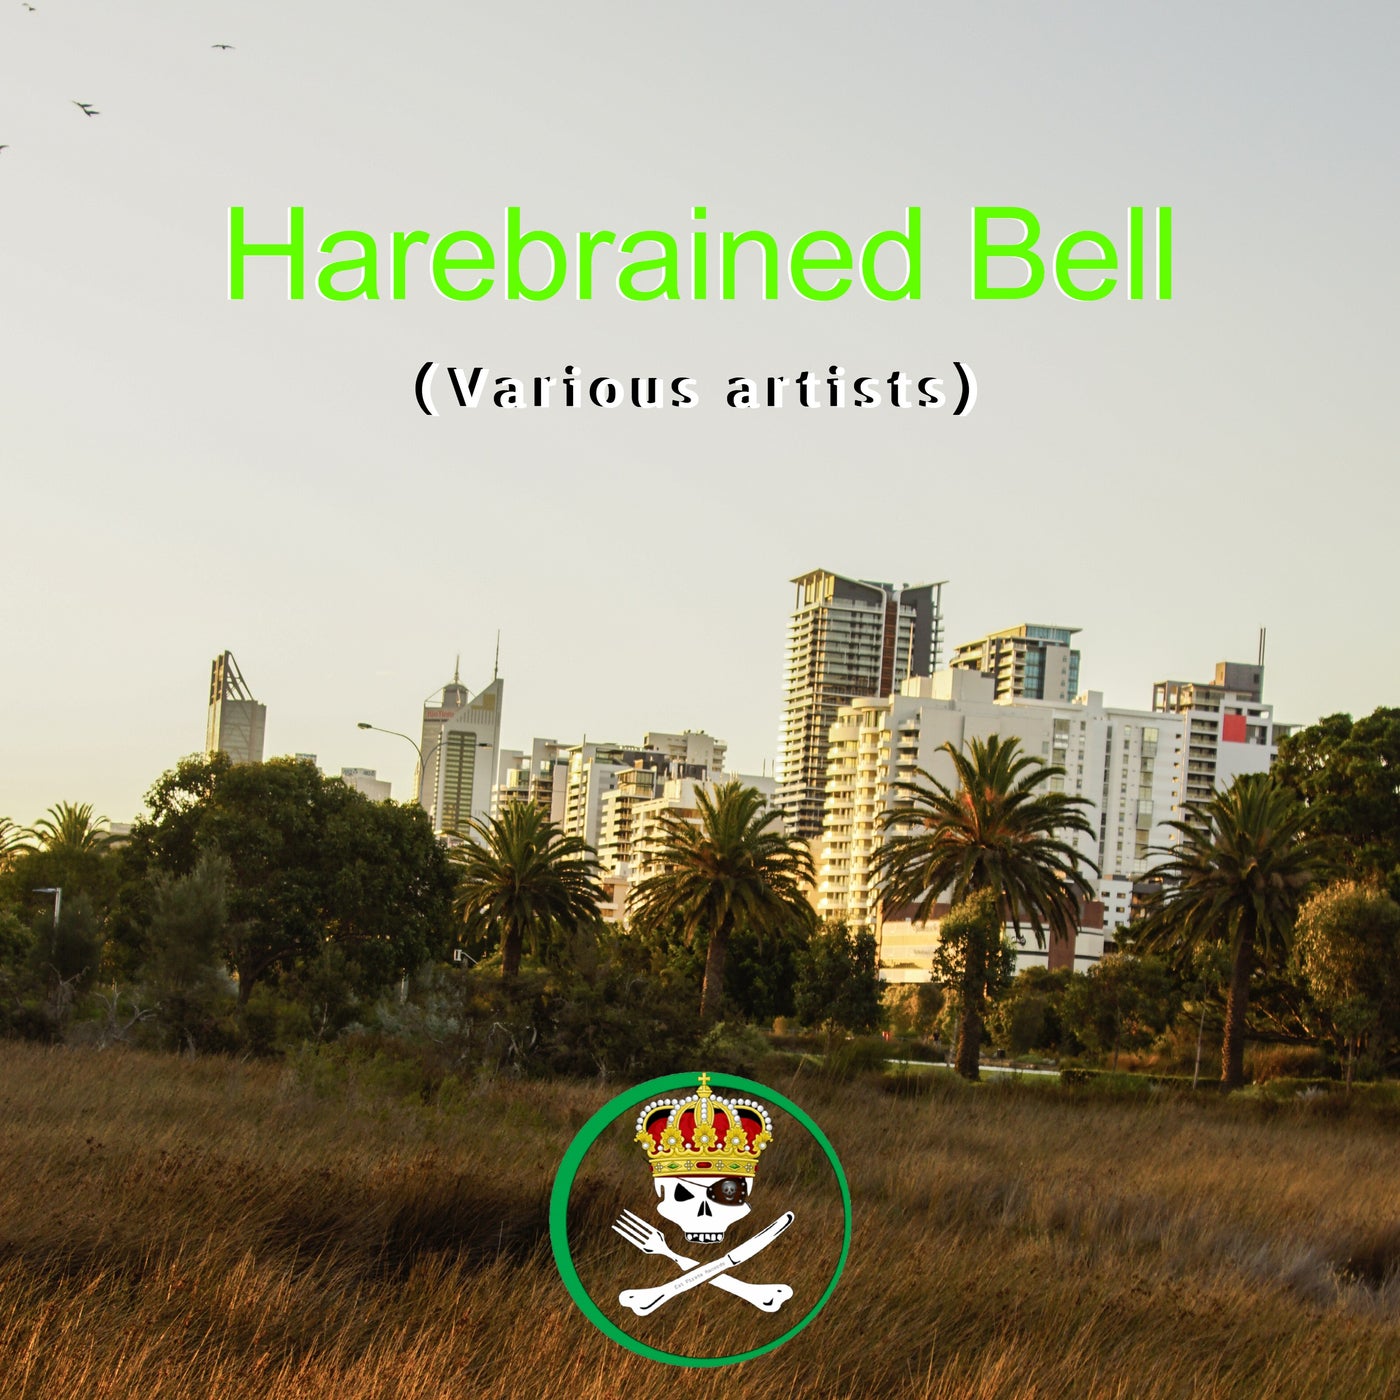 Harebrained Bell